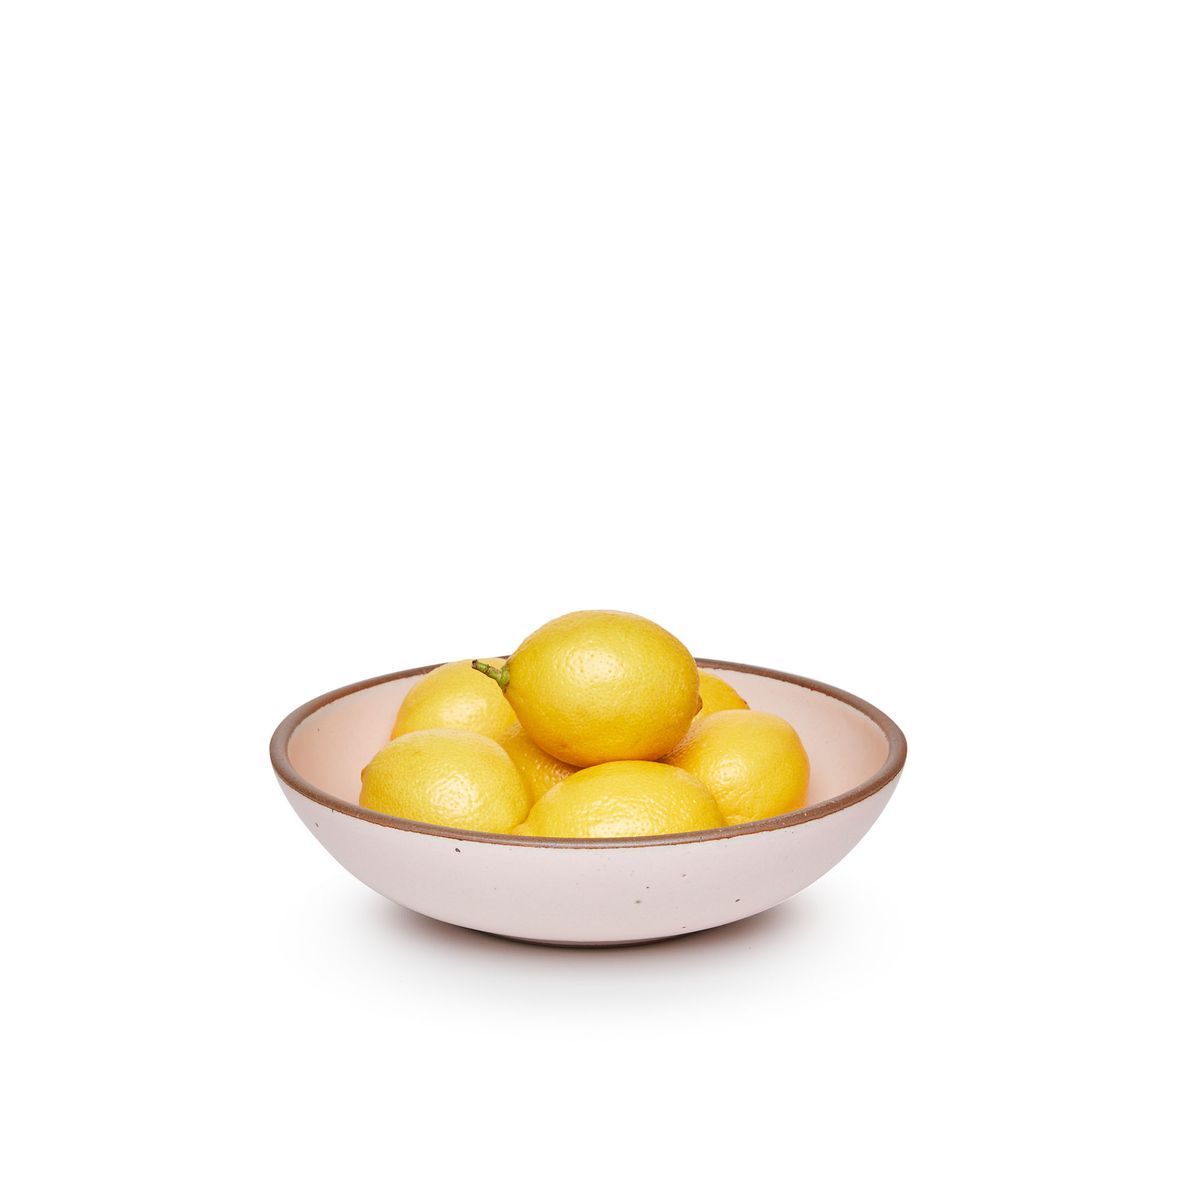 A dinner-sized shallow ceramic bowl in a soft light pink color featuring iron speckles and an unglazed rim, filled with lemons